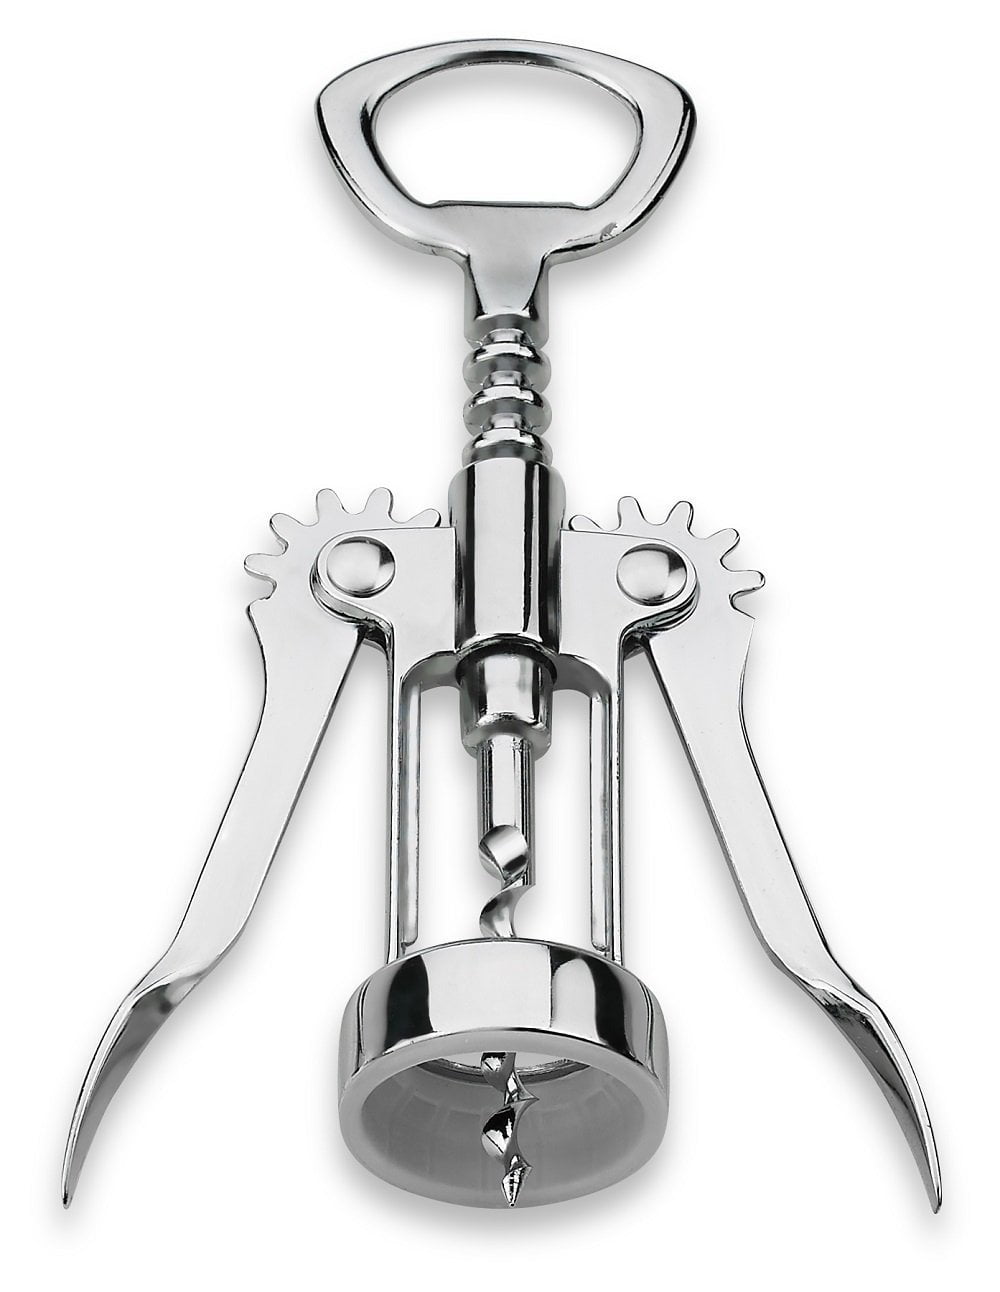 By Kitch N’ Wares Premium All-In-One Wine Corkscrew And Bottle Opener Wine Opener Optimal Balance and Control when Removing Corks Easy To Open Wine & Beer Bottles For Waiters And Wine Enthusiast 